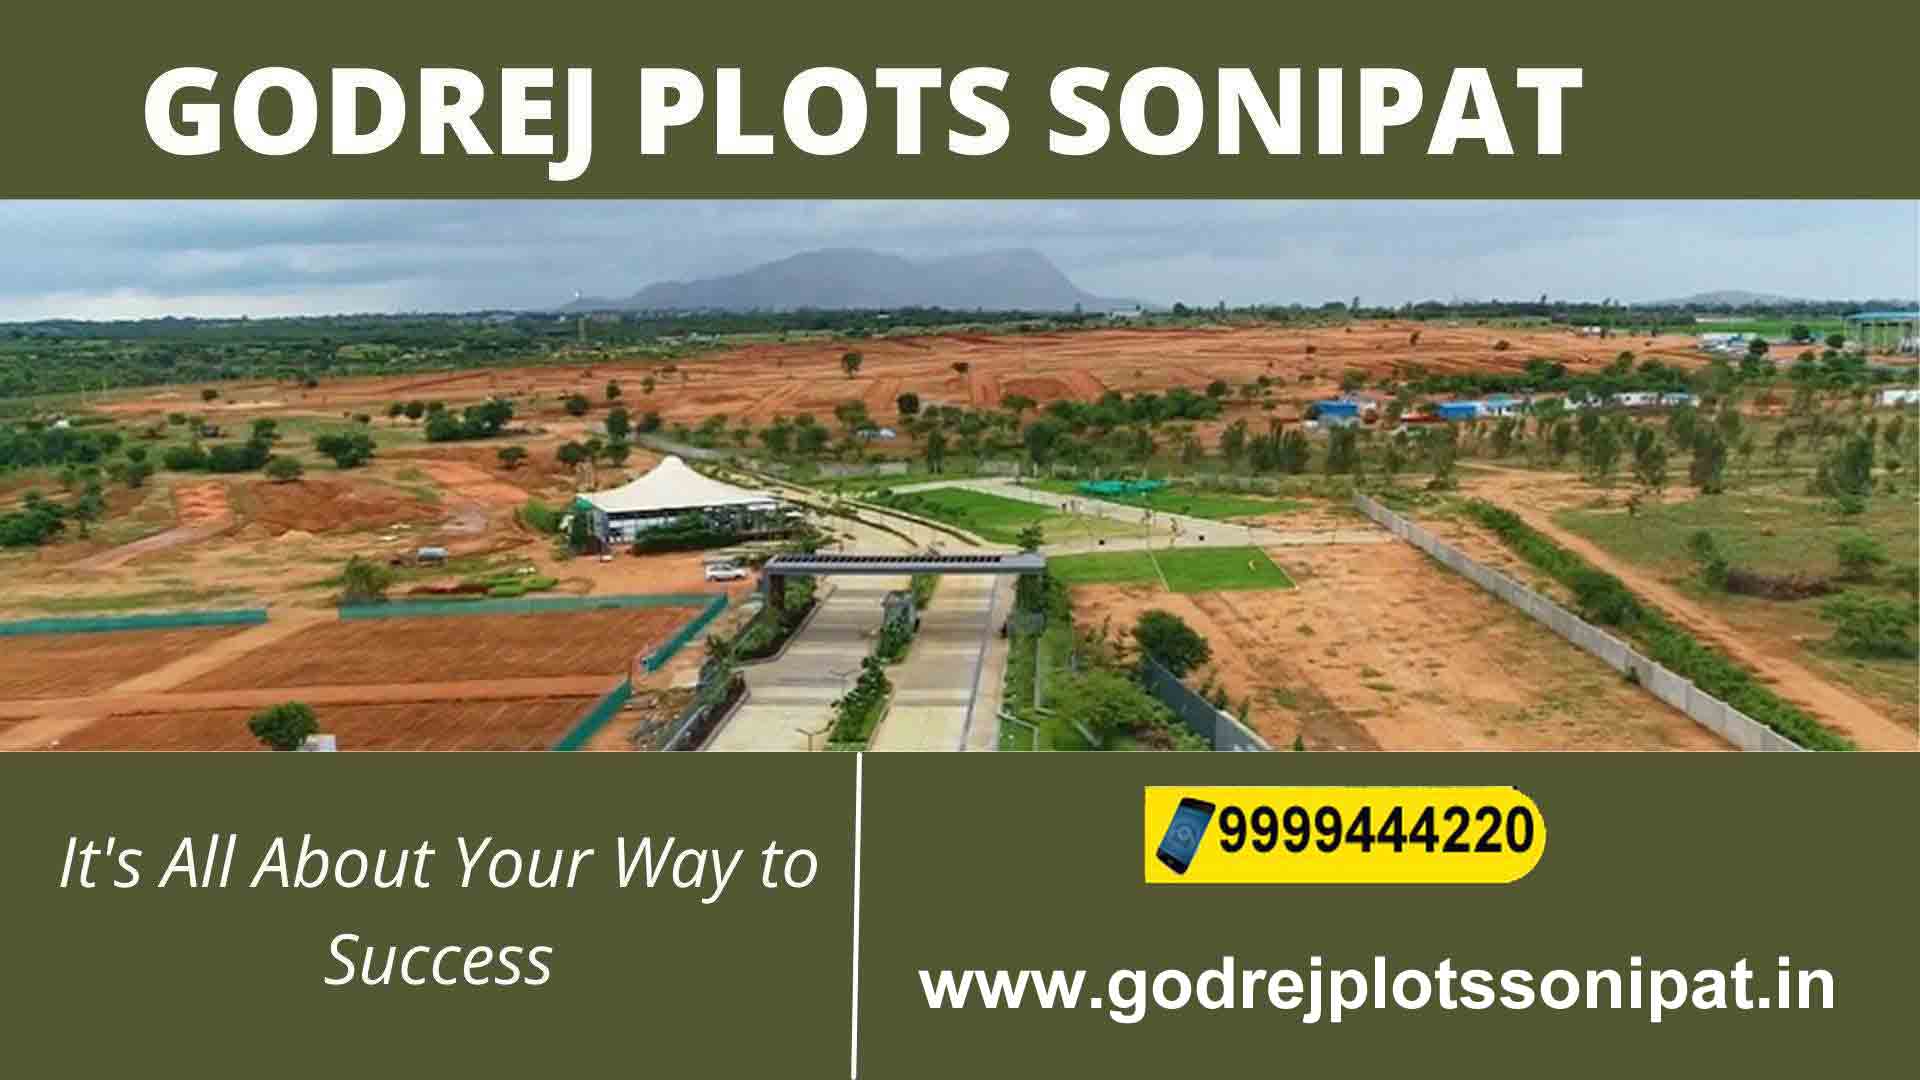 Godrej Plots Sonipat a Great Investment in Realty